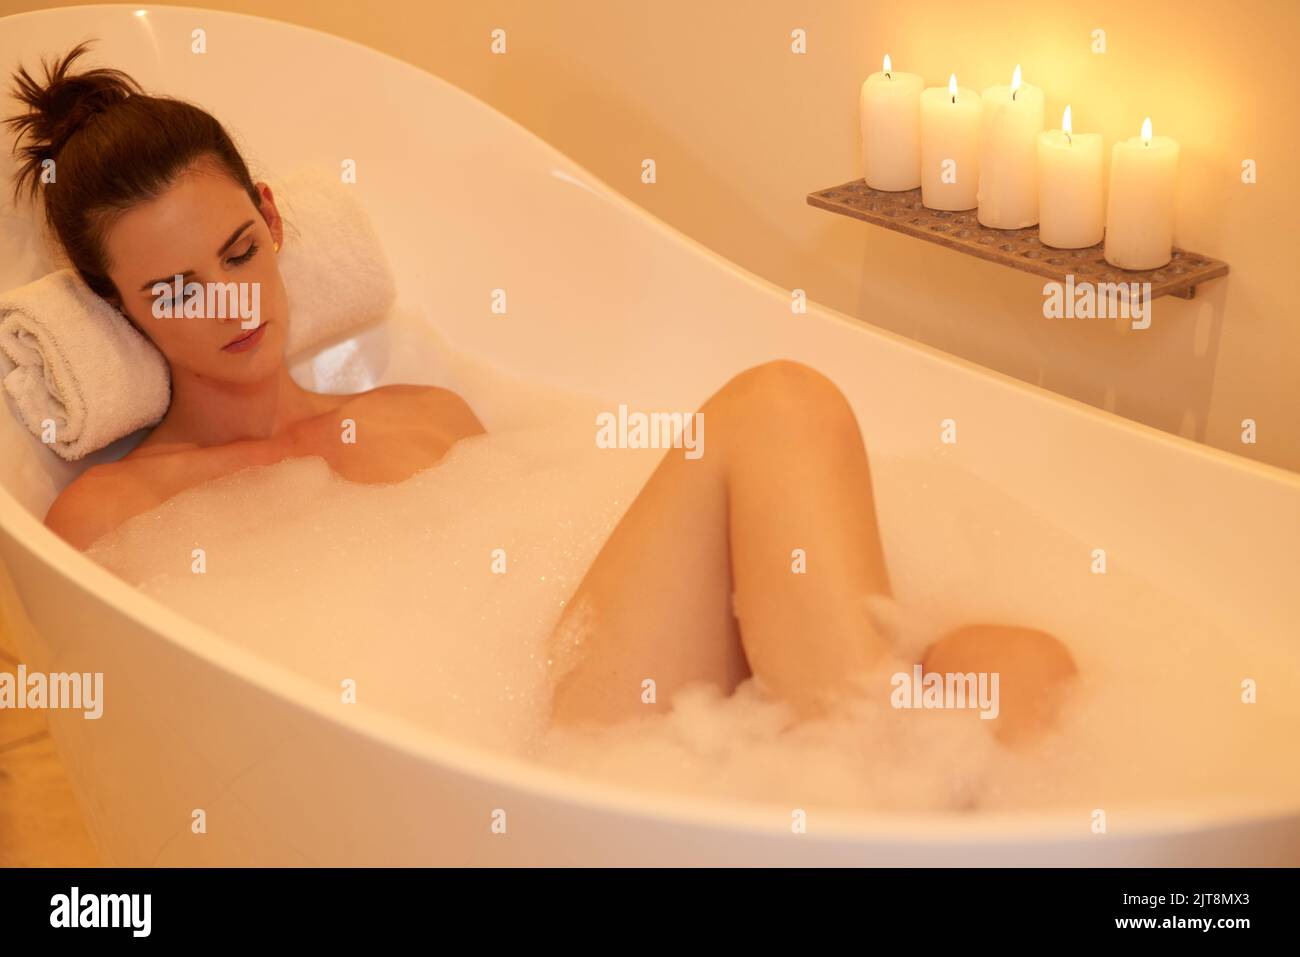 Woman taking bubble bath, front view, full length - Stock Photo -  Masterfile - Premium Royalty-Free, Code: 695-05773037